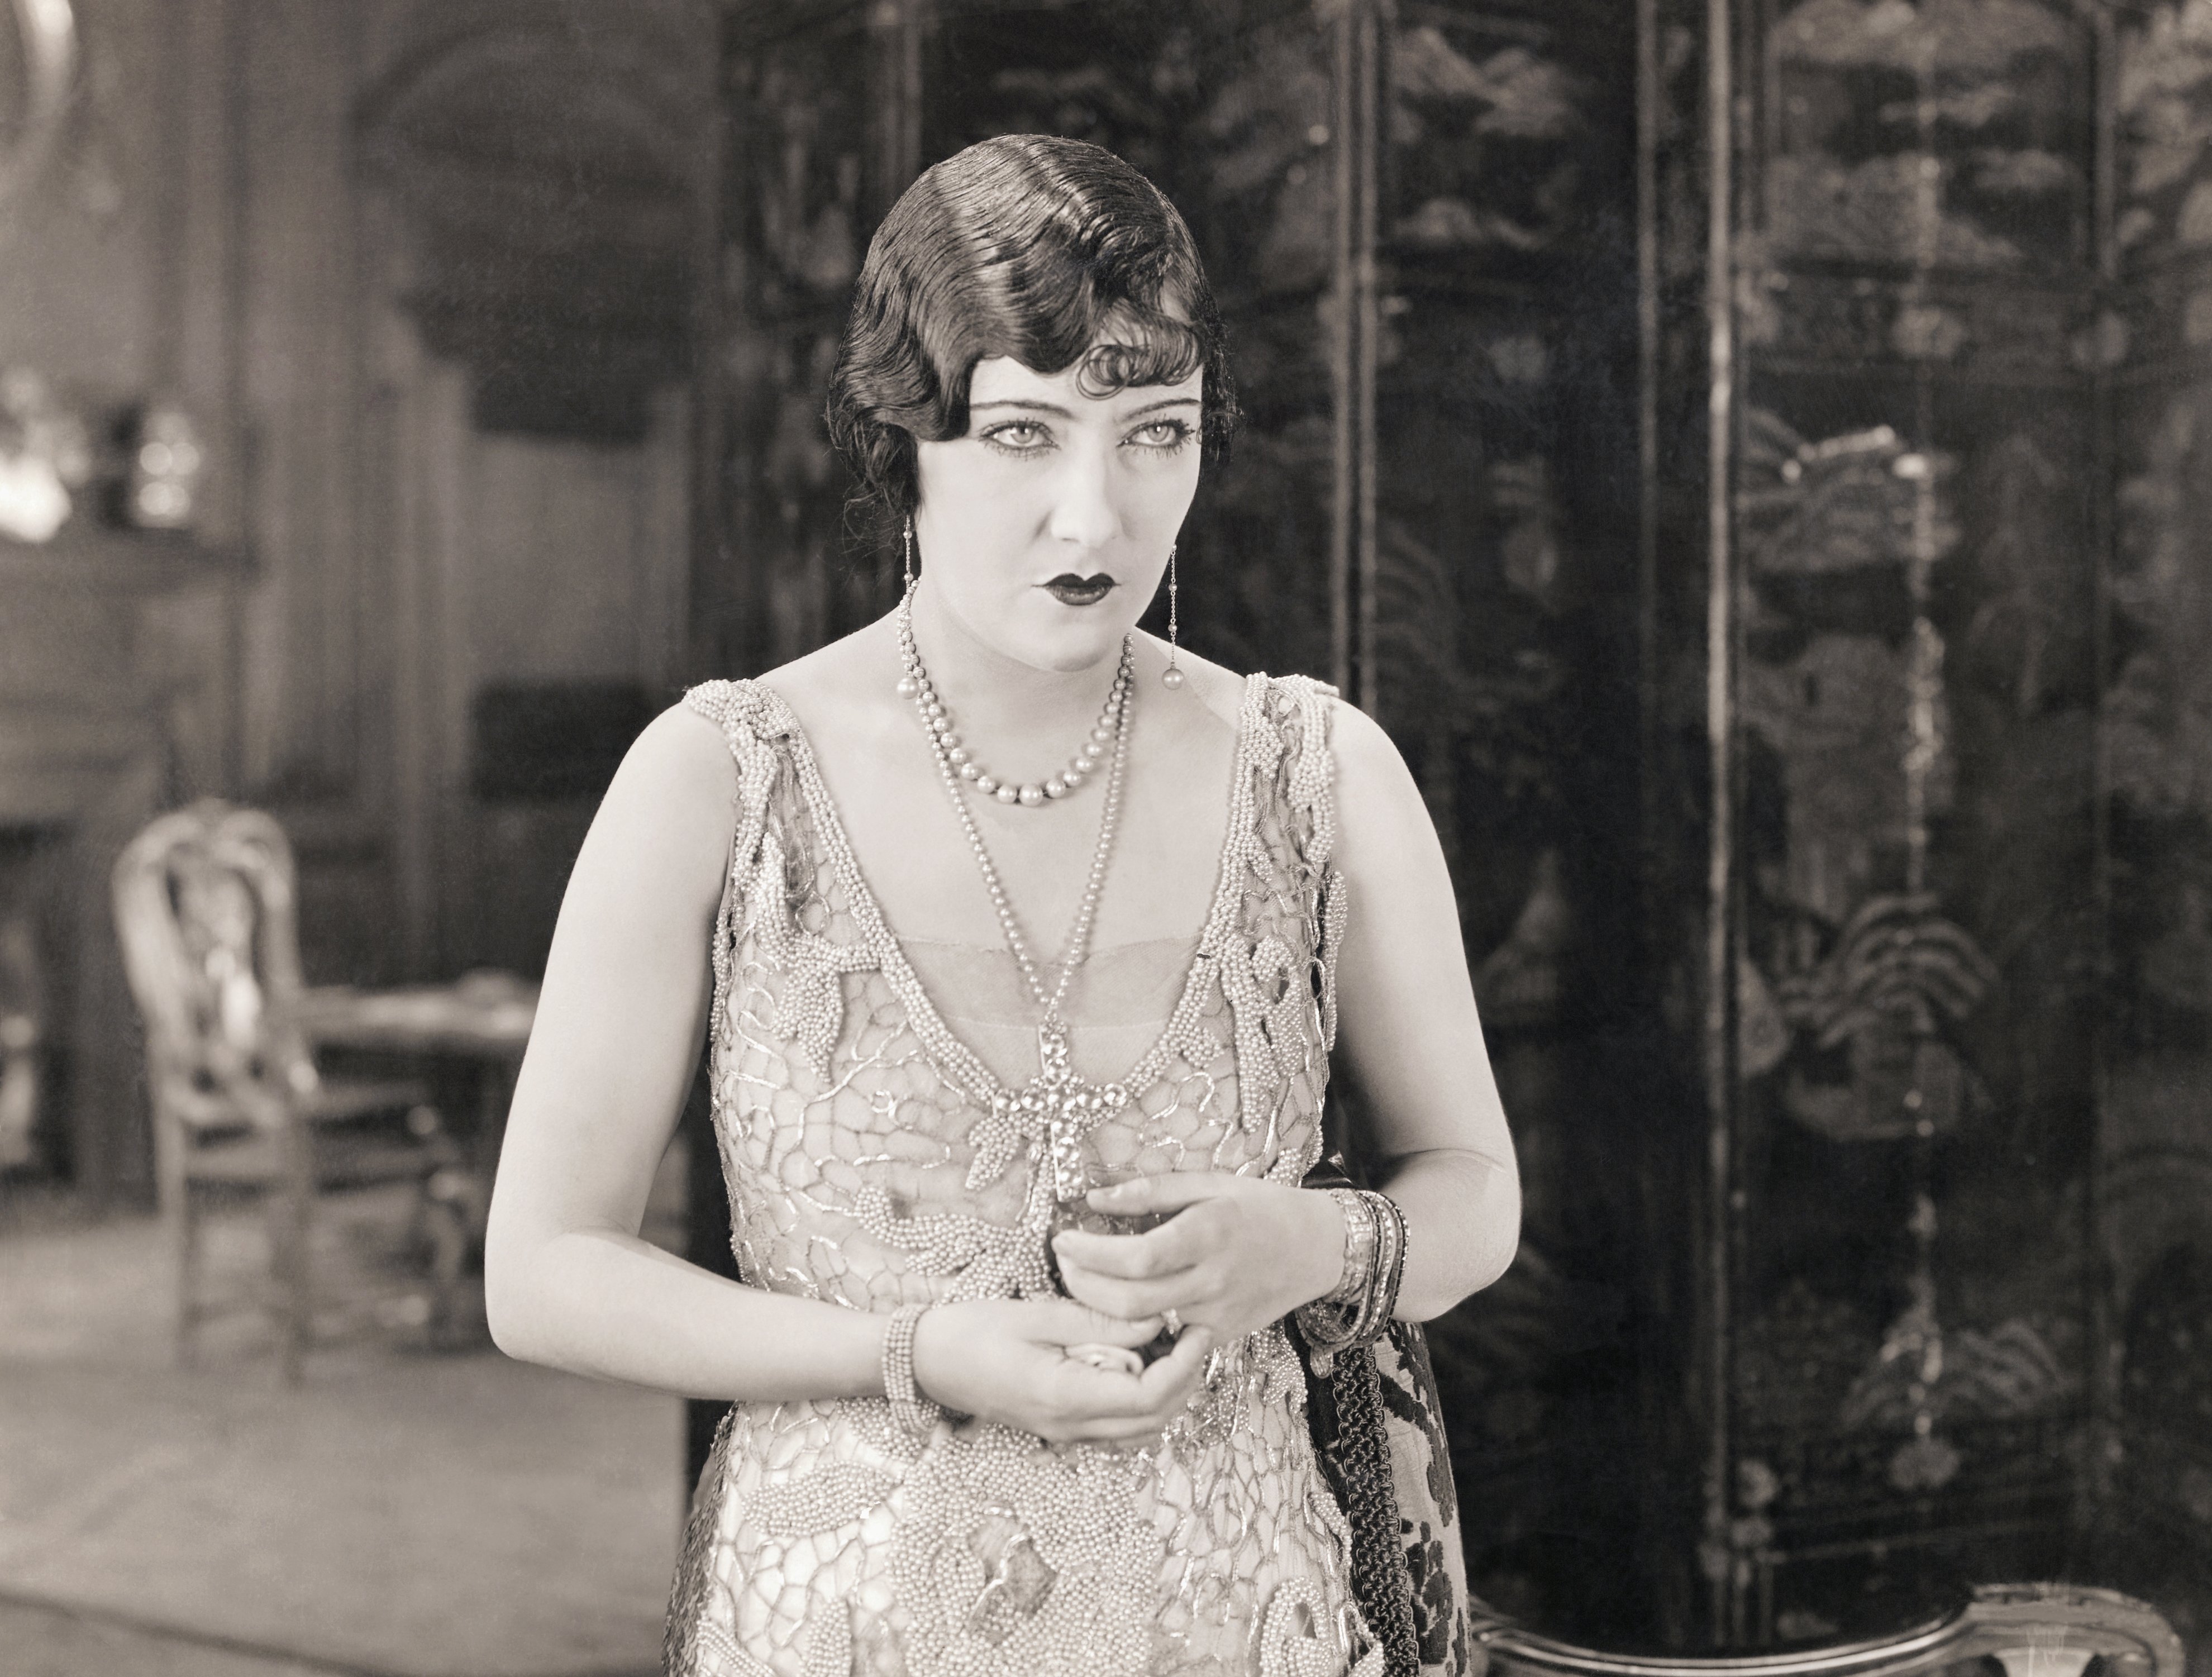 Gloria Swanson in the film "Beyond the Rocks," circa 1922. | Source: Getty Images